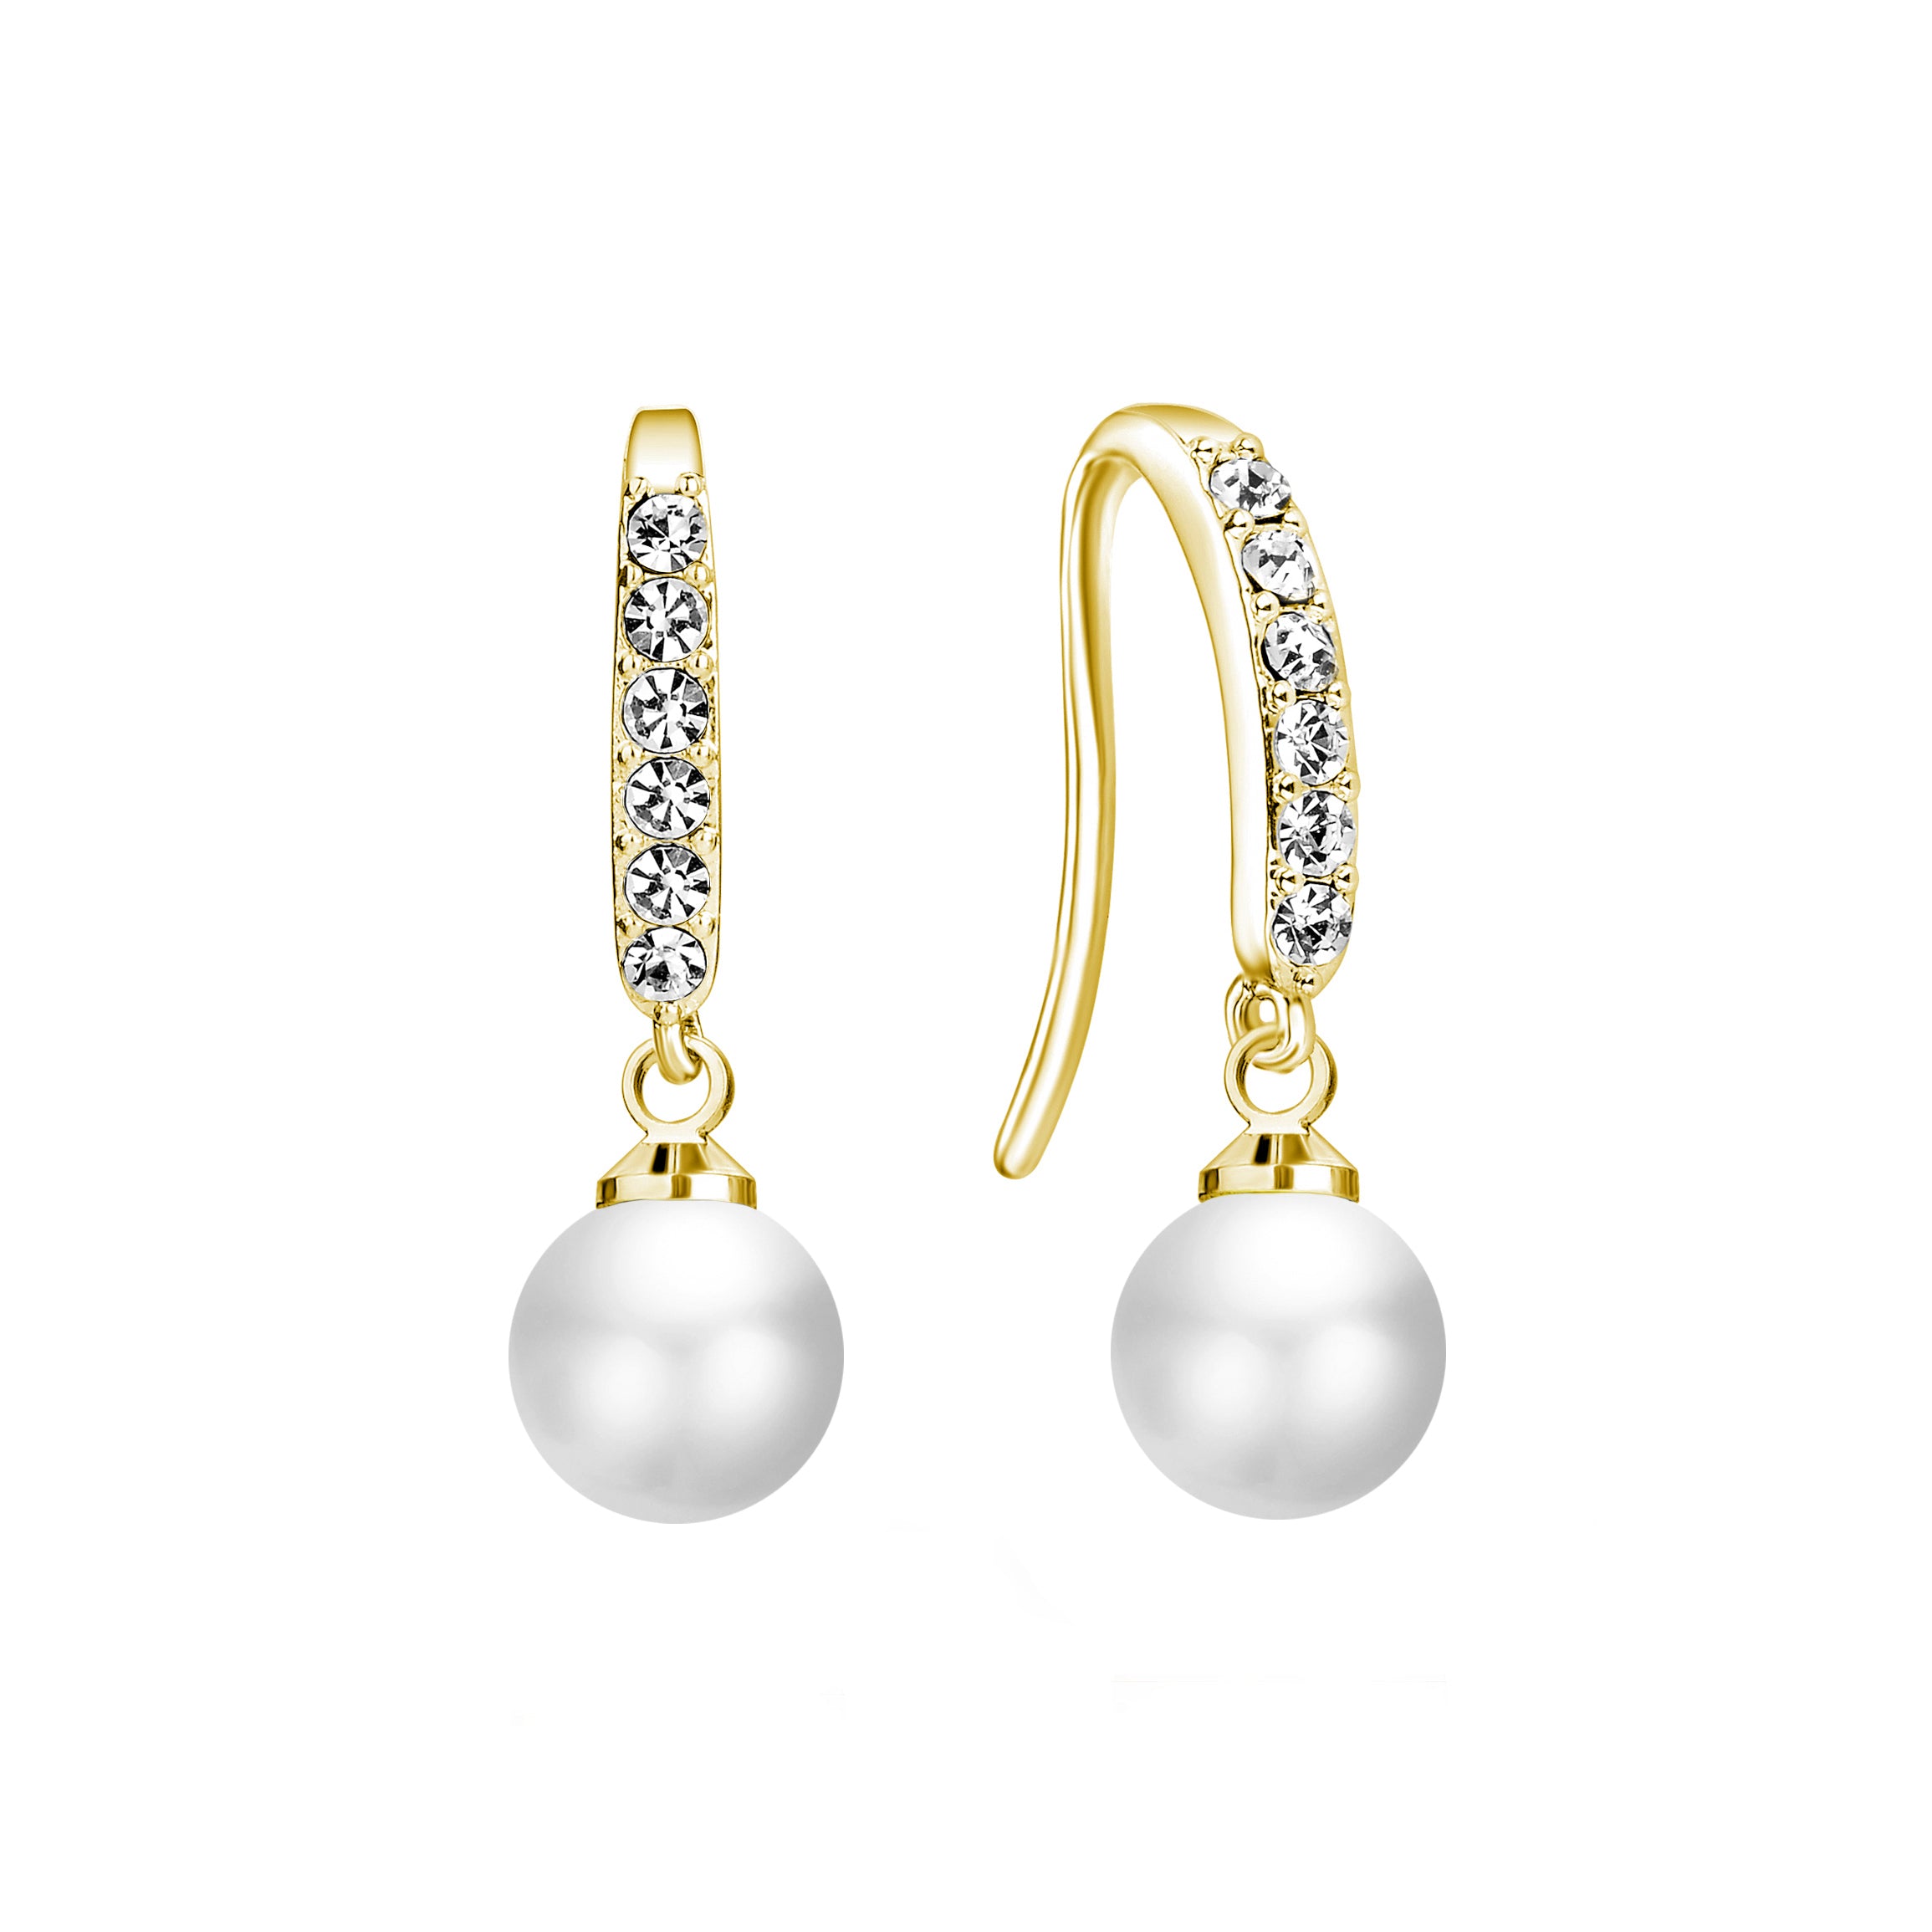 Gold Plated Pearl Drop Earrings Created with Zircondia® Crystals by Philip Jones Jewellery